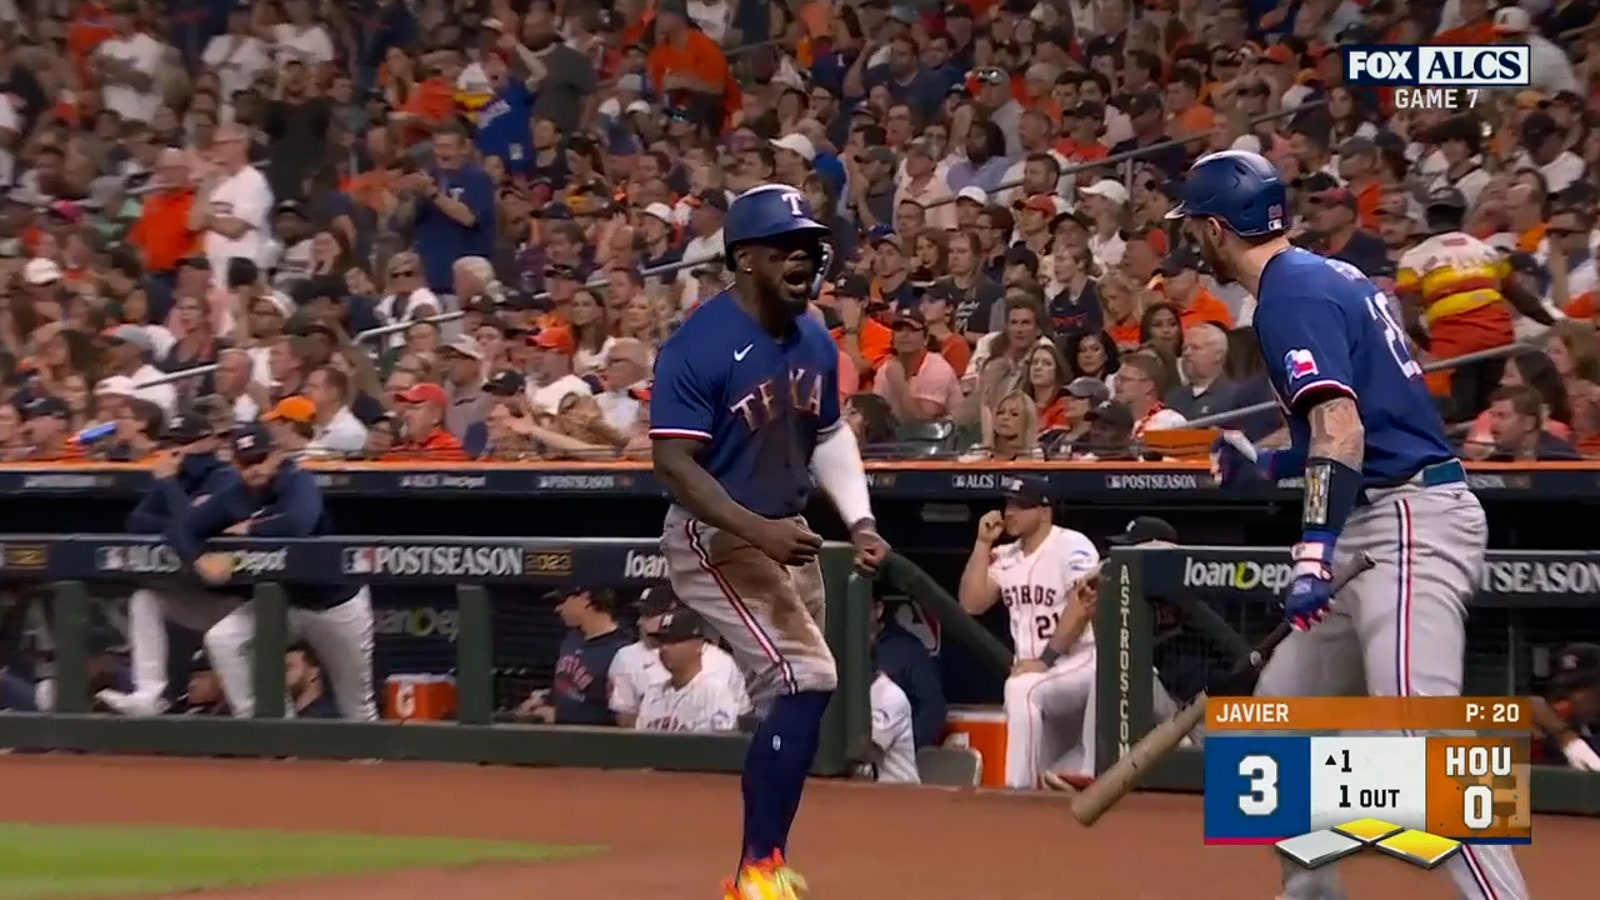 The Rangers scored three runs in the first inning to take an early lead over the Astros